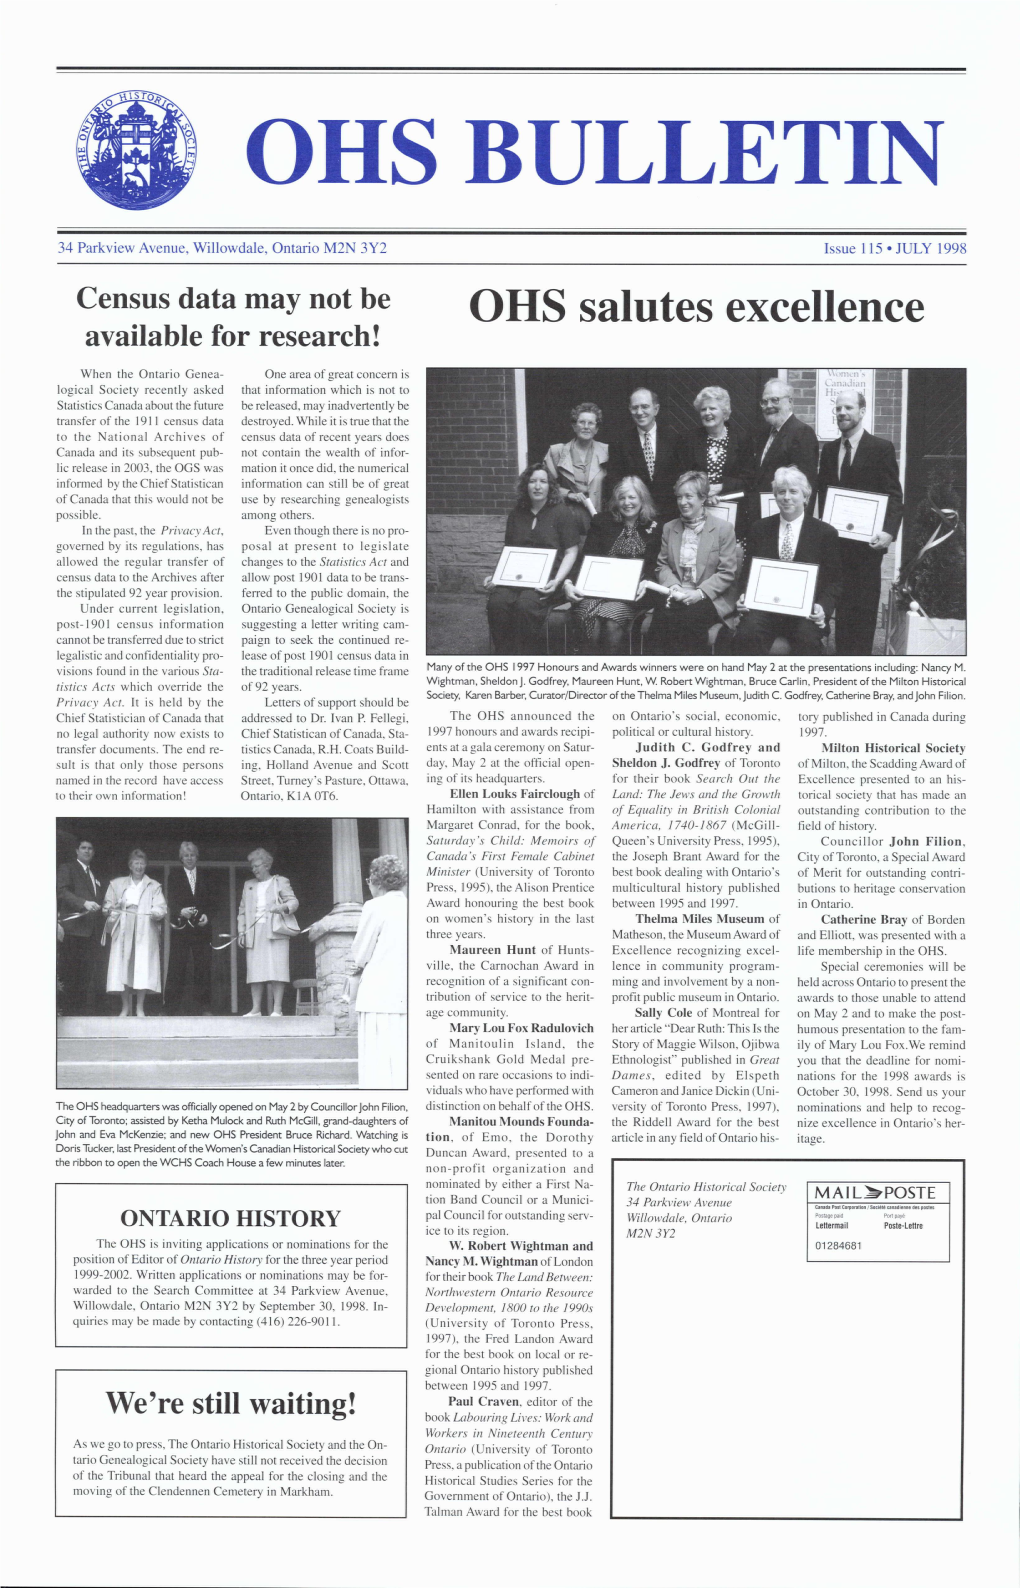 July 1998 OHS Bulletin, Issue